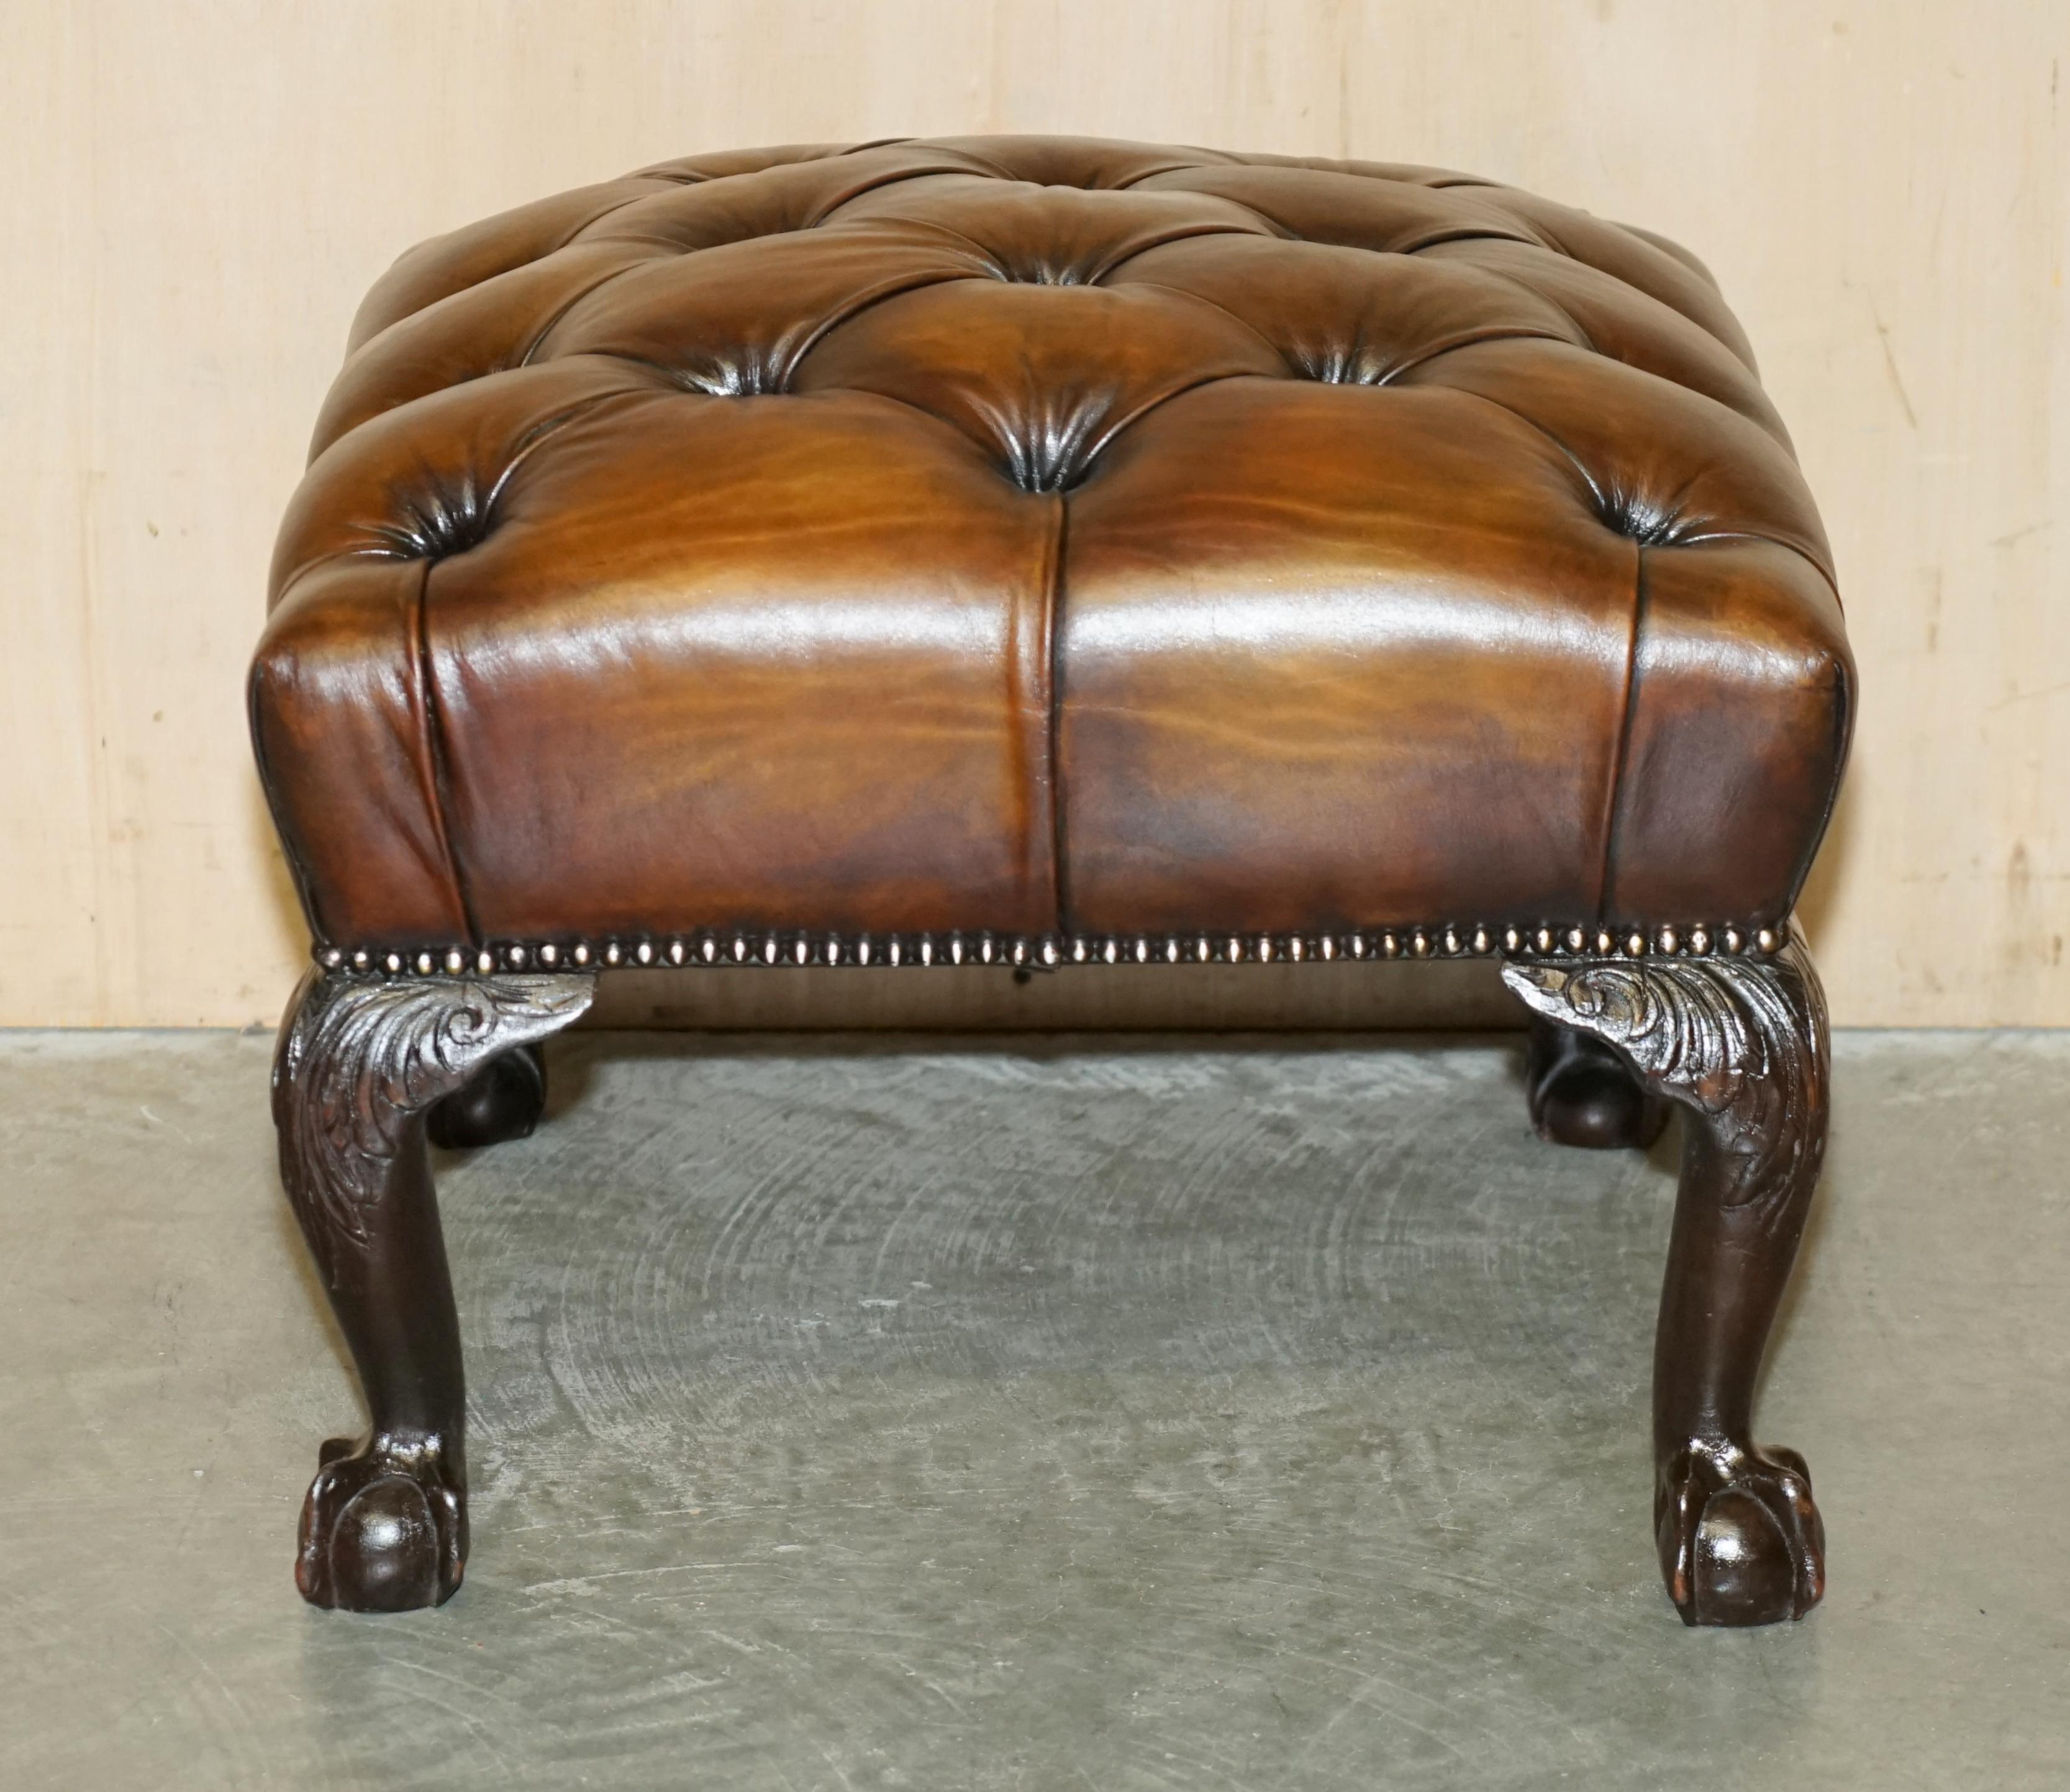 FINE ANTIQUE ViCTORIAN CLAW & BALL BROWN LEATHER RESTORED CHESTERFIELD FOOTSTOOL For Sale 11